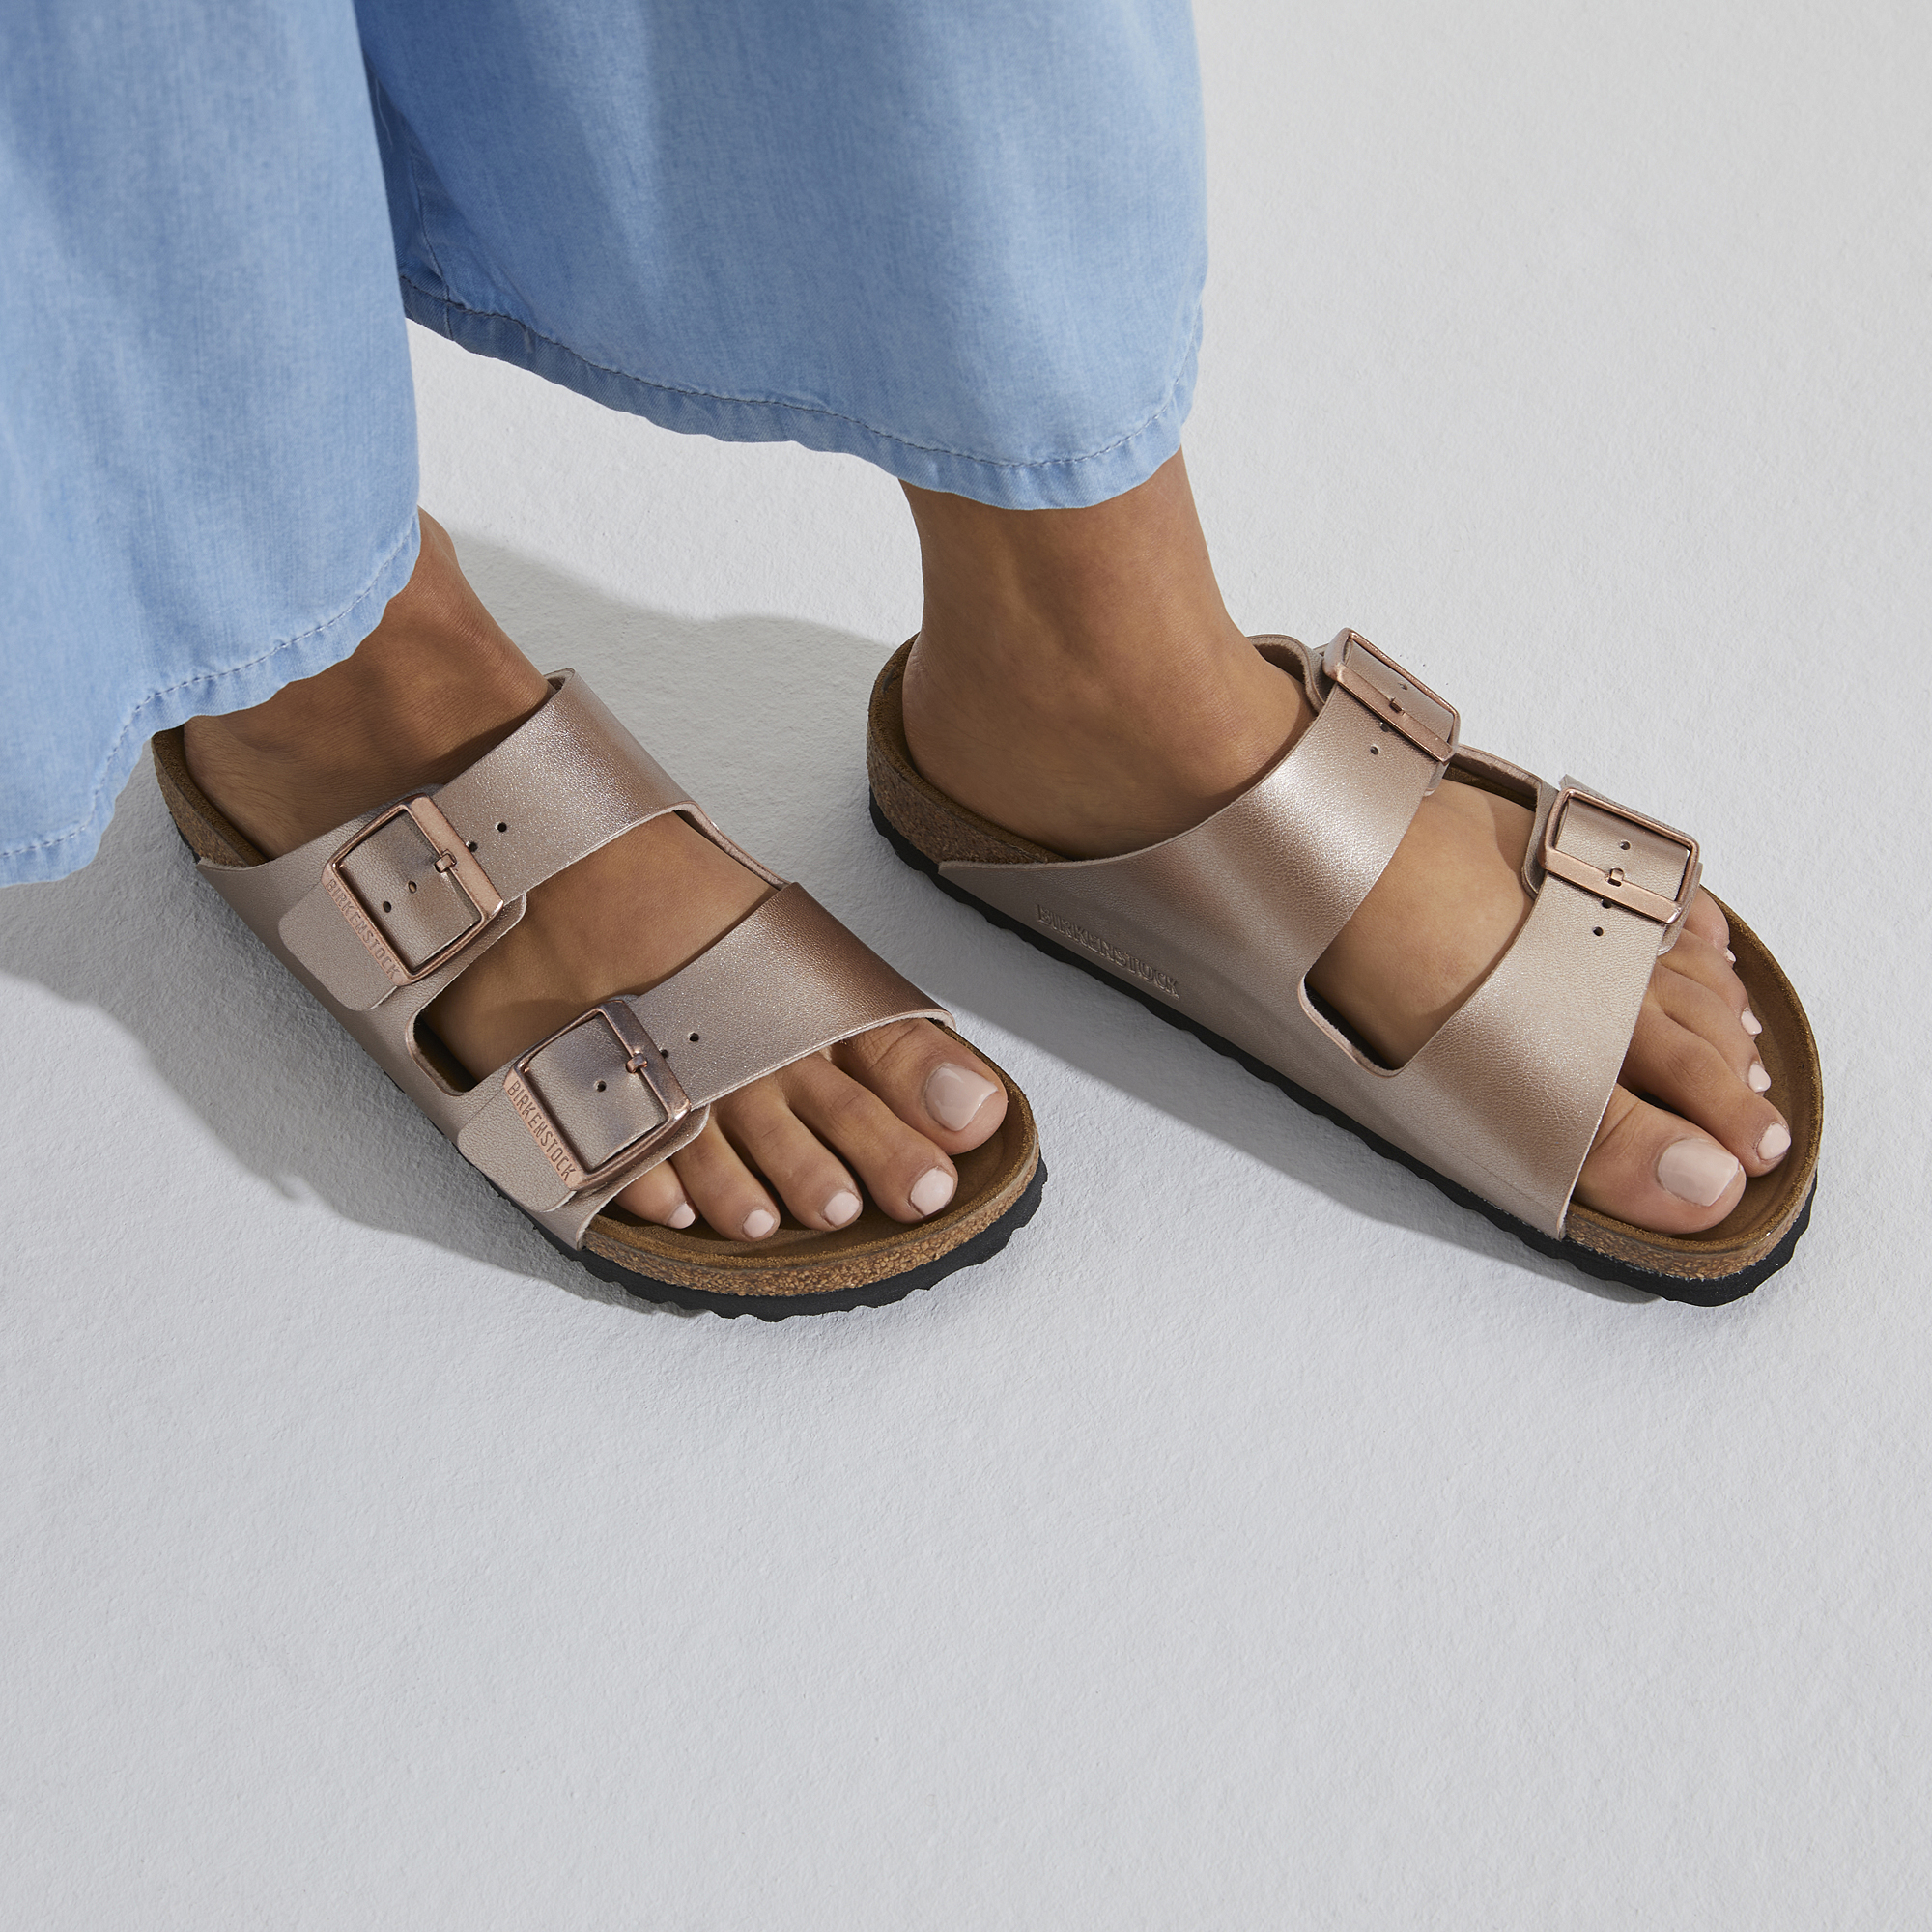 Timberland Carolista Women's Sandals Copper - Buy At Outlet Prices!